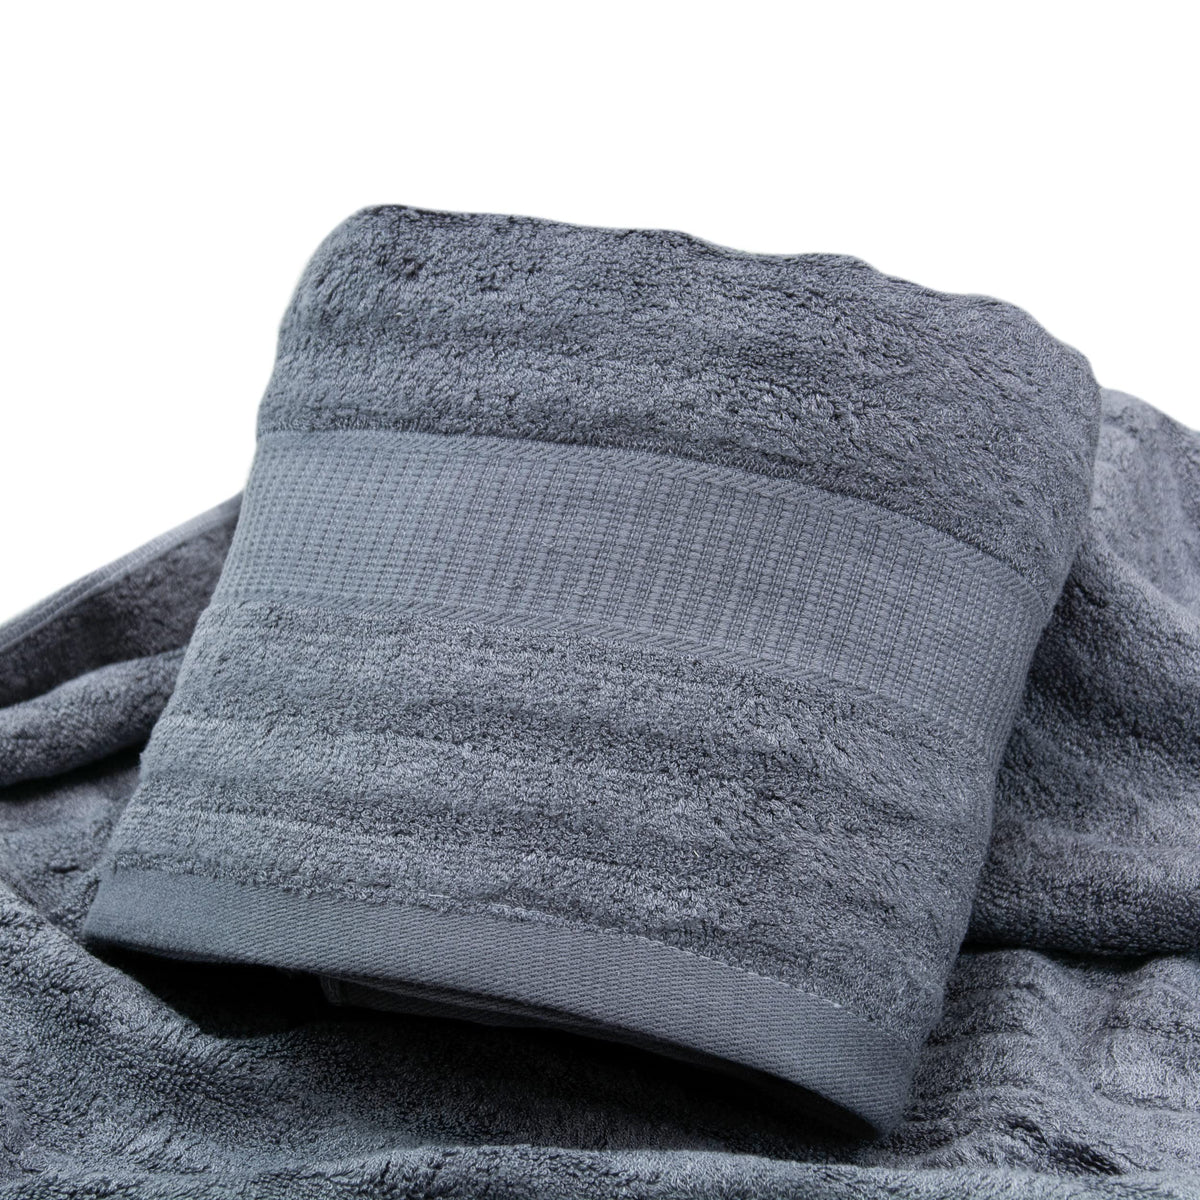 Mush Ultra Soft & Super Absorbent | 600 GSM Bamboo Bath Towel Set | 29 X 59 Inches (Space Grey)